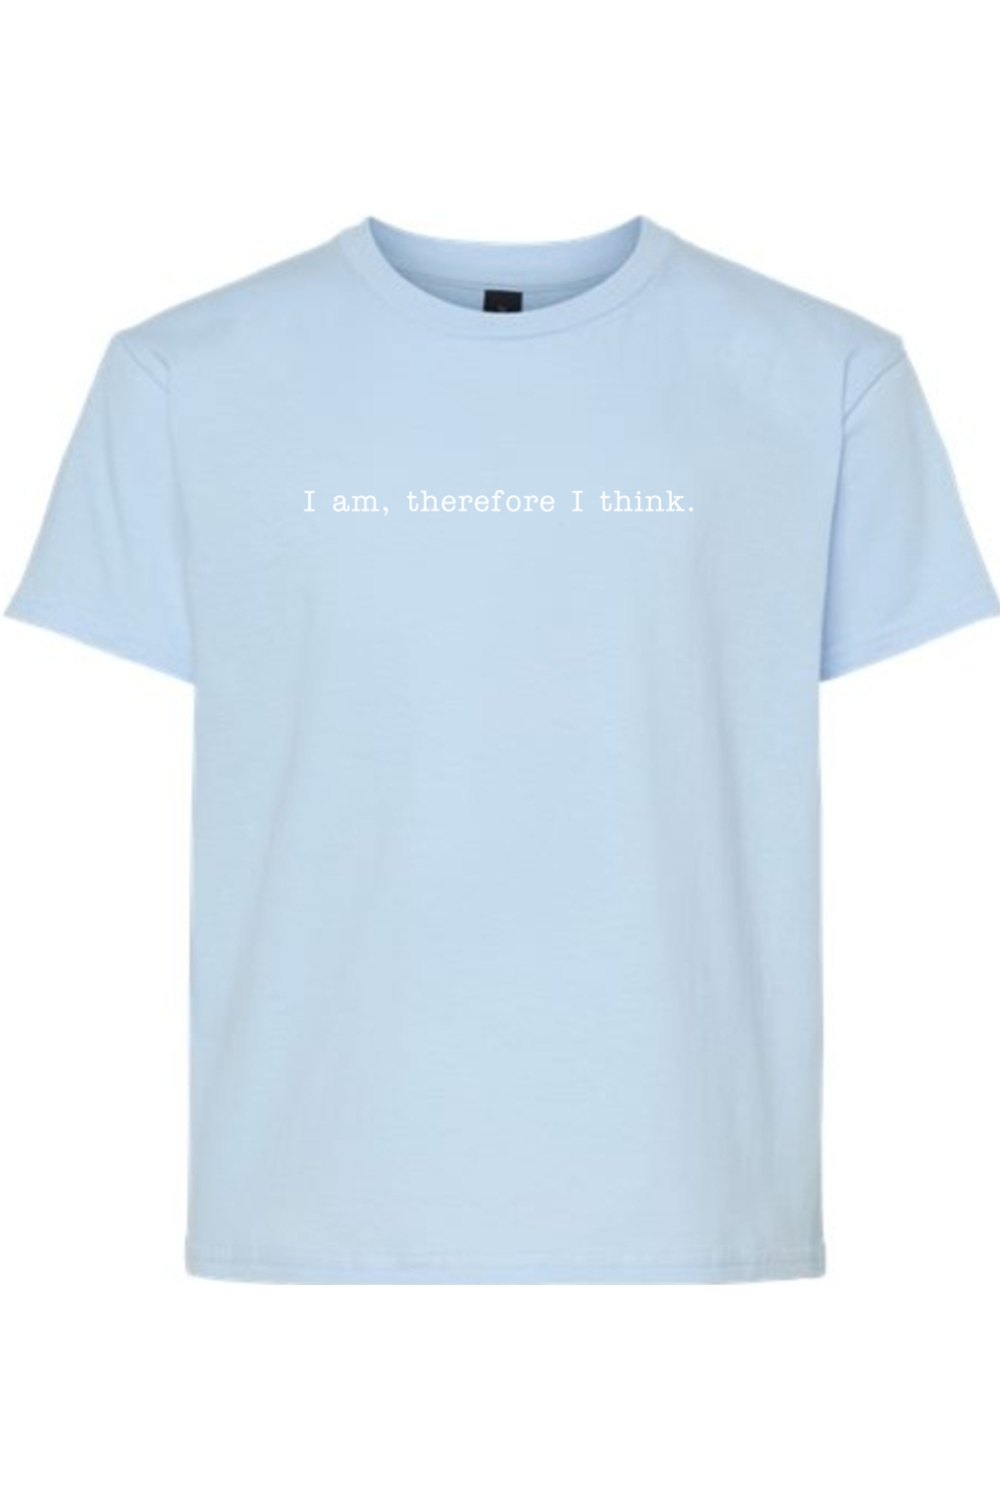 I am, Therefore I Think - Realism Philosophy Youth T-Shirt